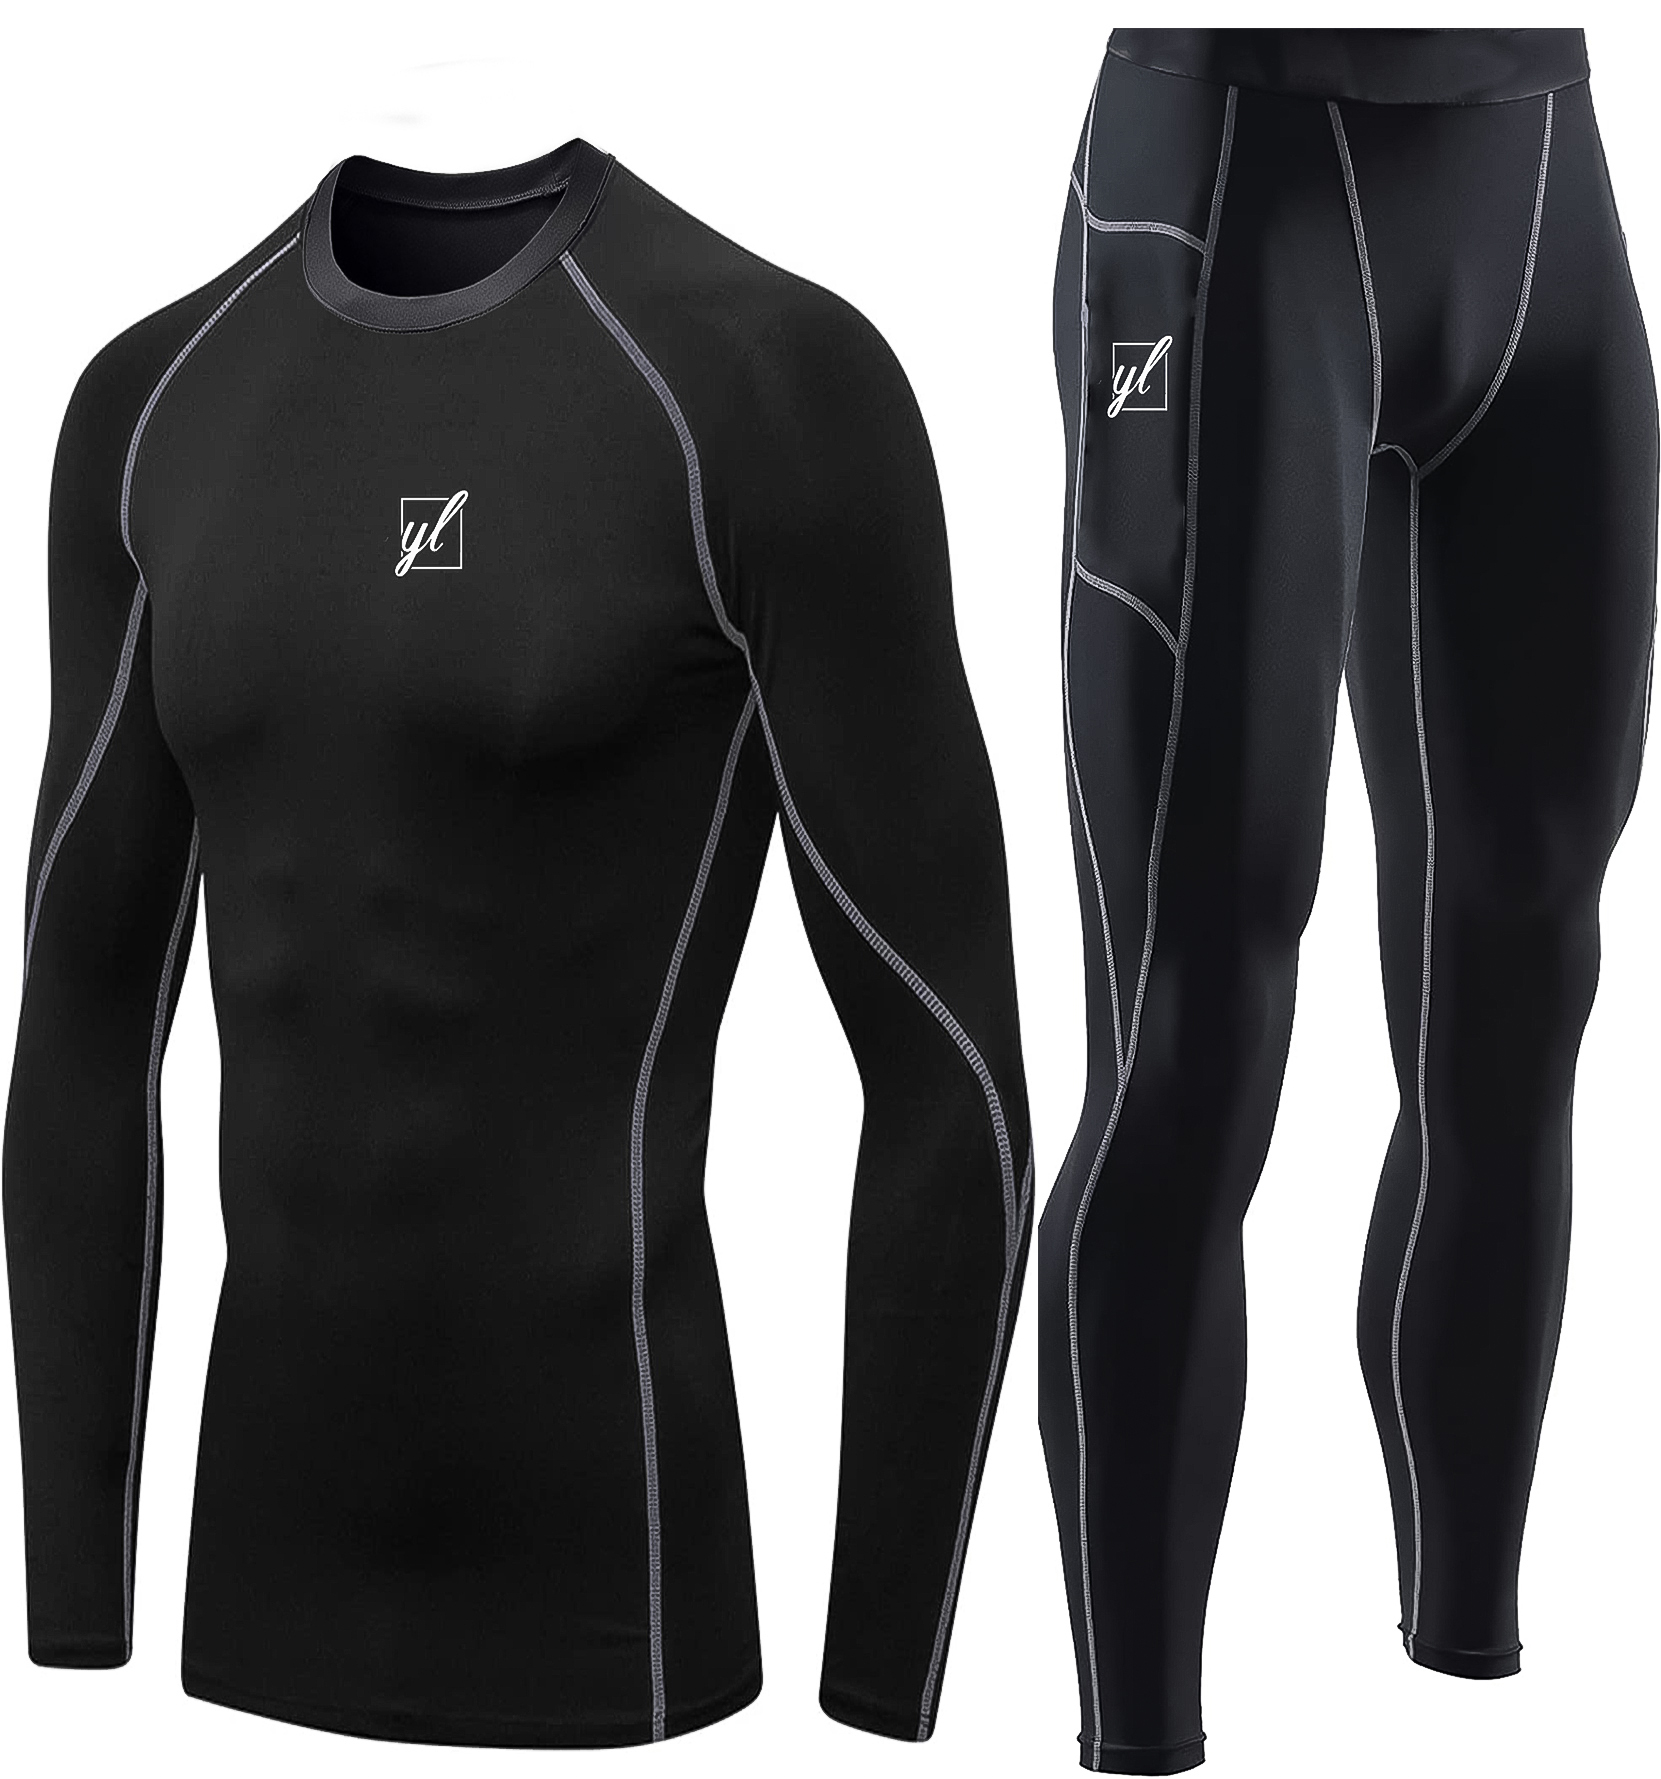 Men's Compression Tights -Combo: Top and Bottom with silver Stiches 